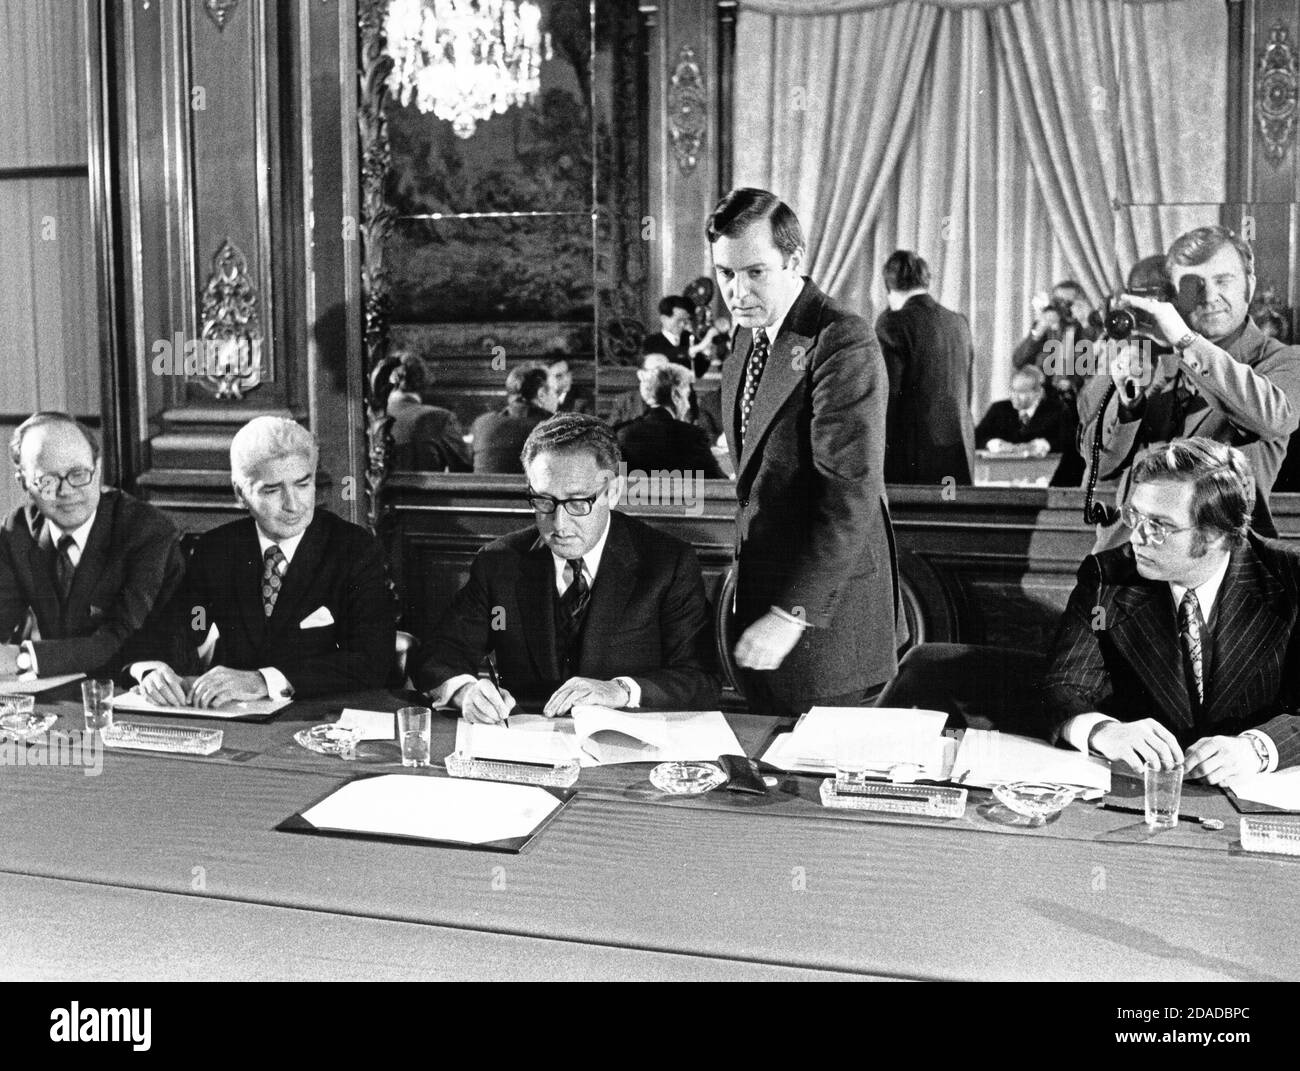 In this photo released by the White House, Assistant to the President (Nixon) for National Security Affairs Henry A. Kissinger, center, initials the Vietnam Peace Agreement in the International Conference Center in Paris France on Tuesday, January 23, 1973.Mandatory Credit: Robert L. Knudsen / White House via CNP / MediaPunch Stock Photo